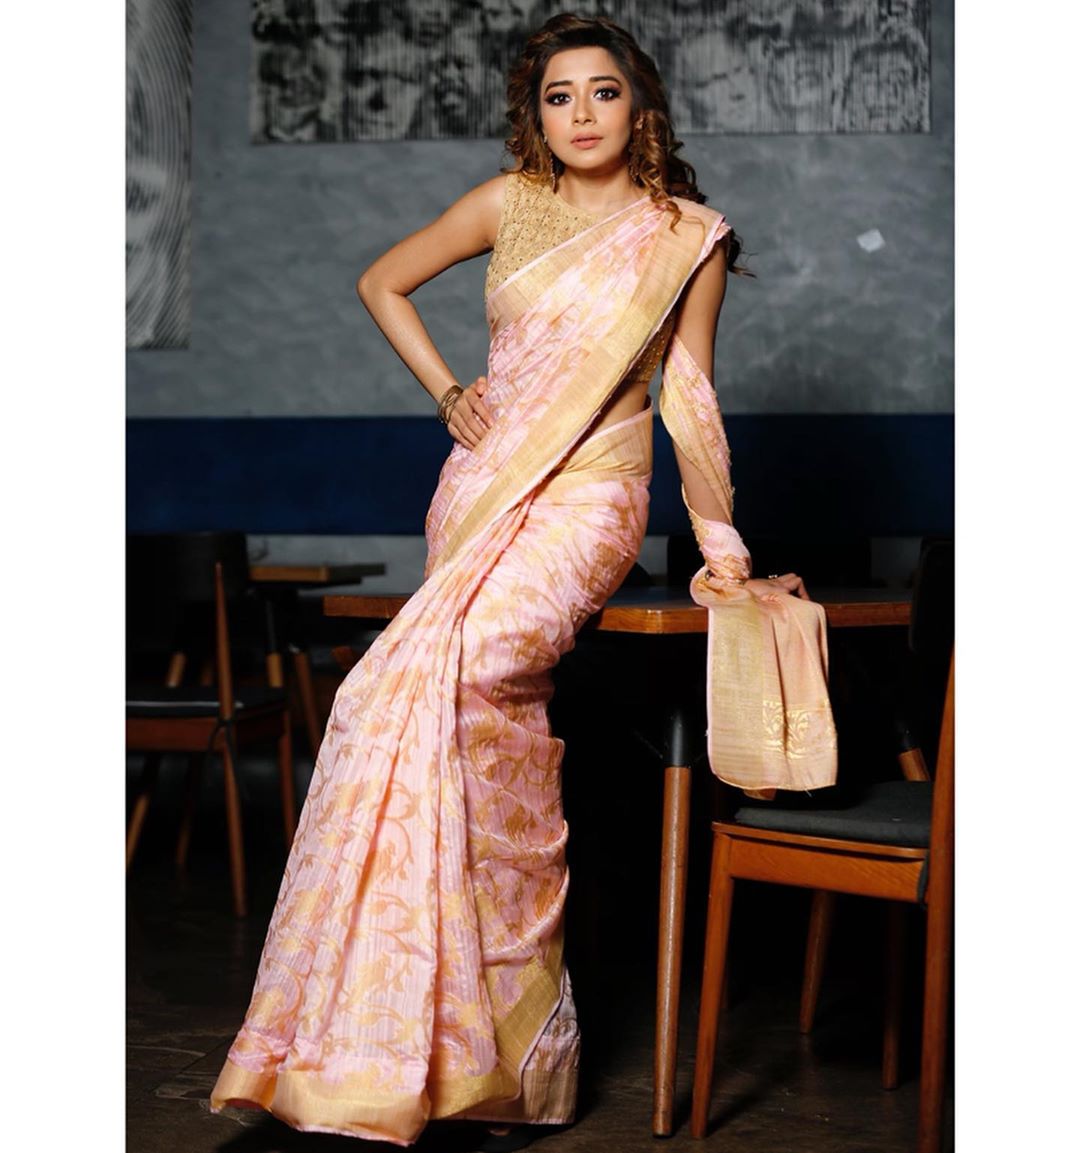 Tina Datta looks gorgeous in her latest sari avatar - The Indian Wire